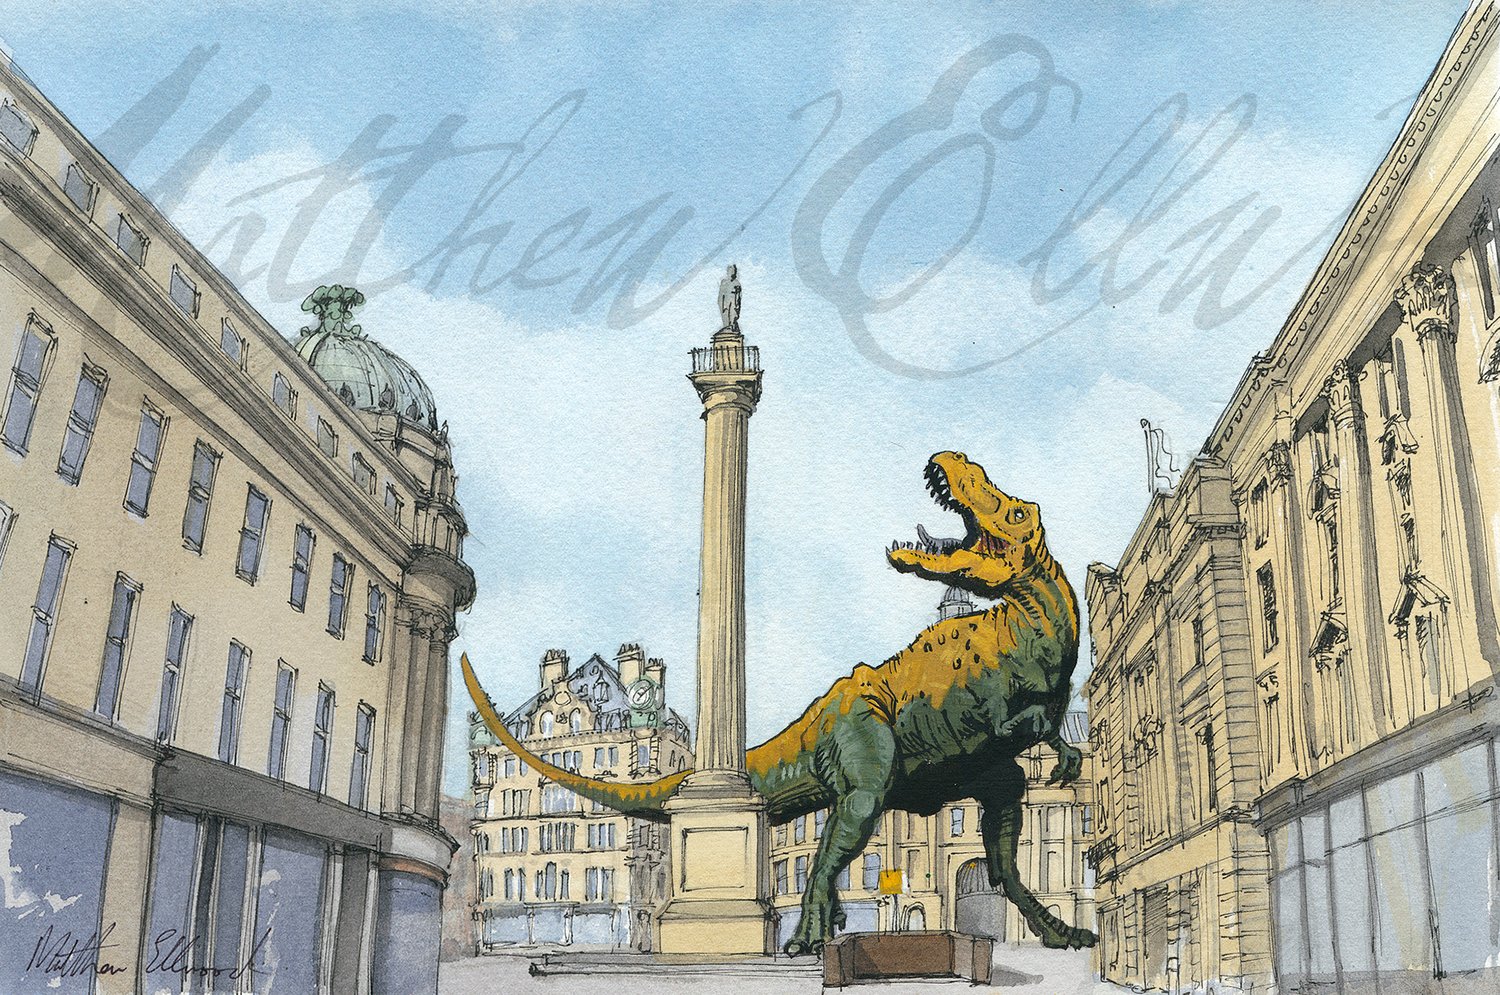 Towering Monster (v) T-Rex at Grey's Monument